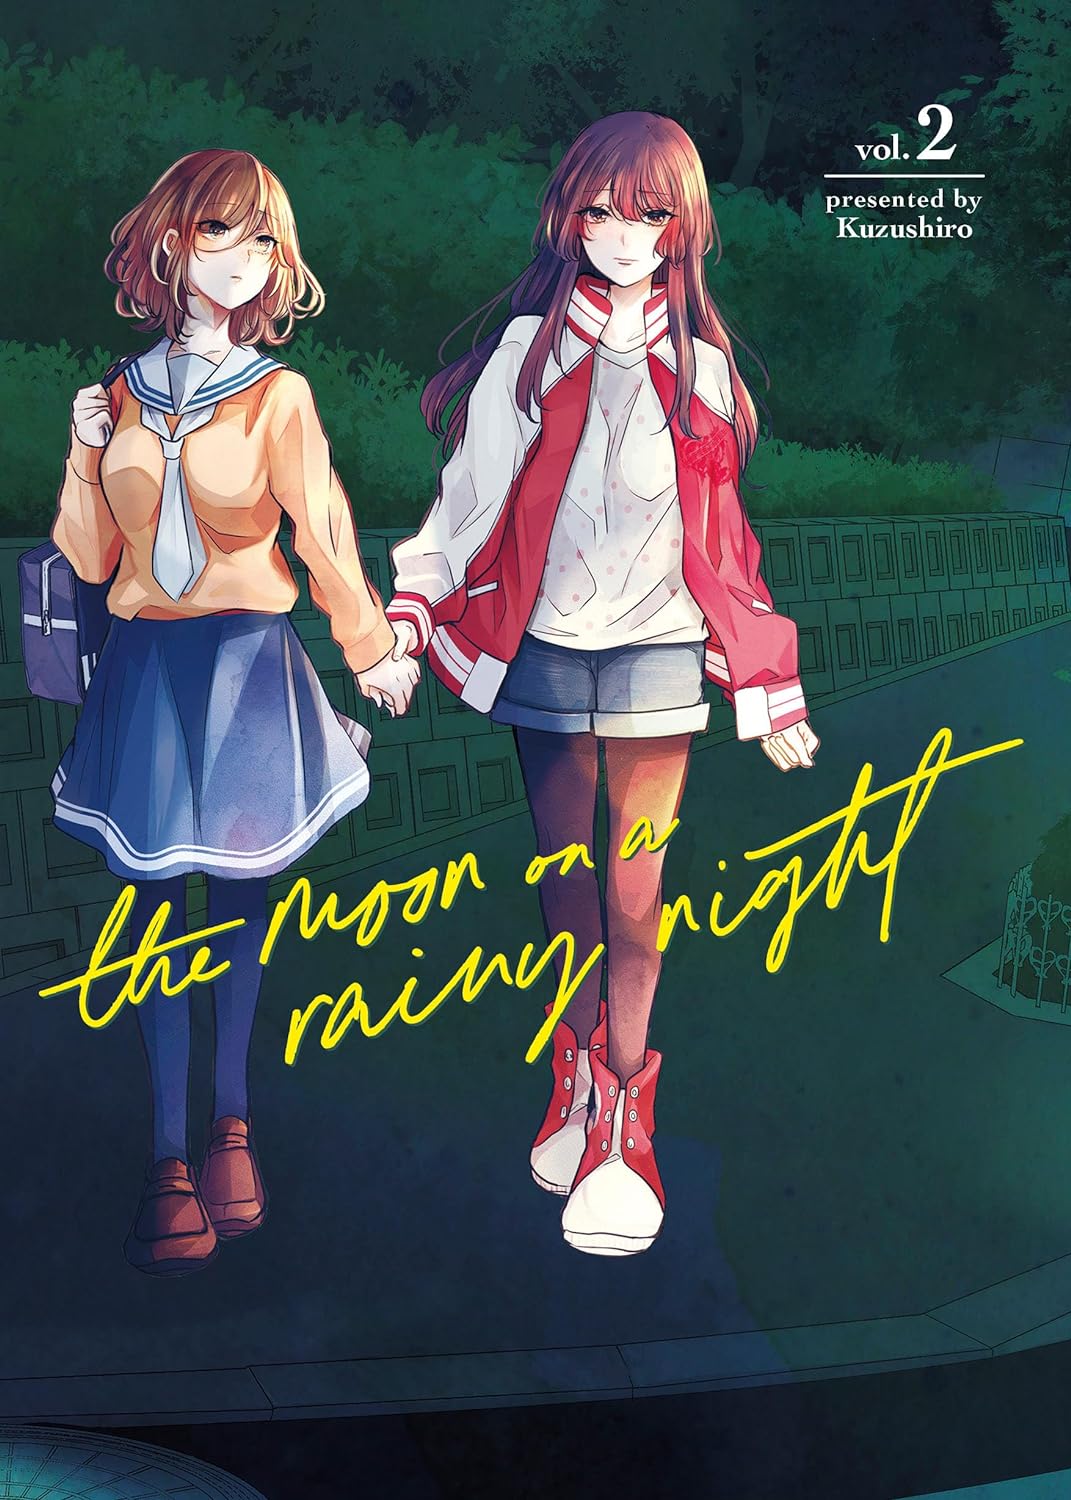 Cover of The Moon on a Rainy Night vol. 2,showing two teenage girls walking at night, holding hands. 